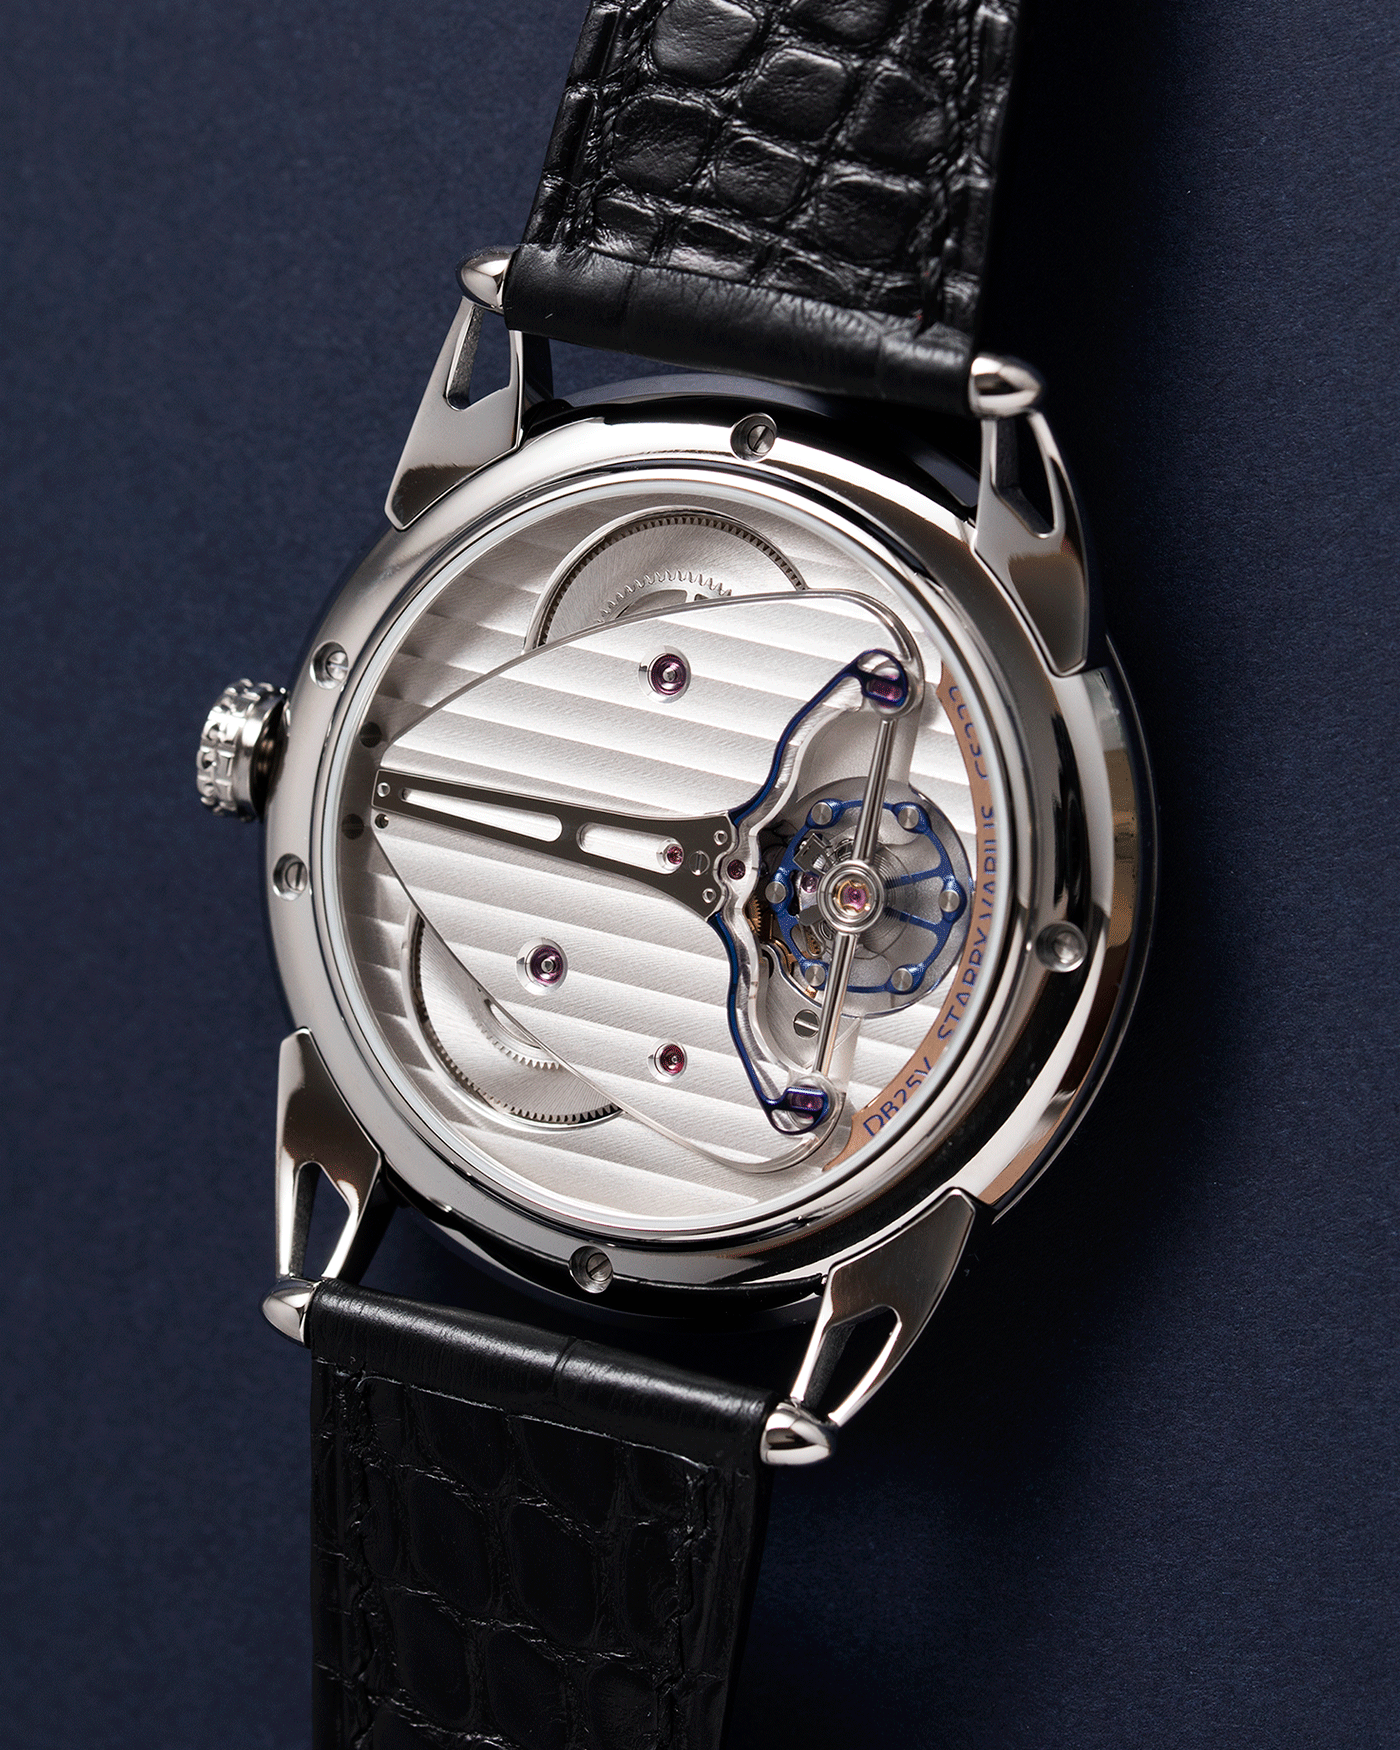 Brand: De Bethune Year: 2020 Model: Starry Varius Reference: DB25 Material: Titanium Movement: In-House Cal. DB2005 Case Diameter: 42mm Strap: De Bethune Black Alligator with Titanium Tang Buckle